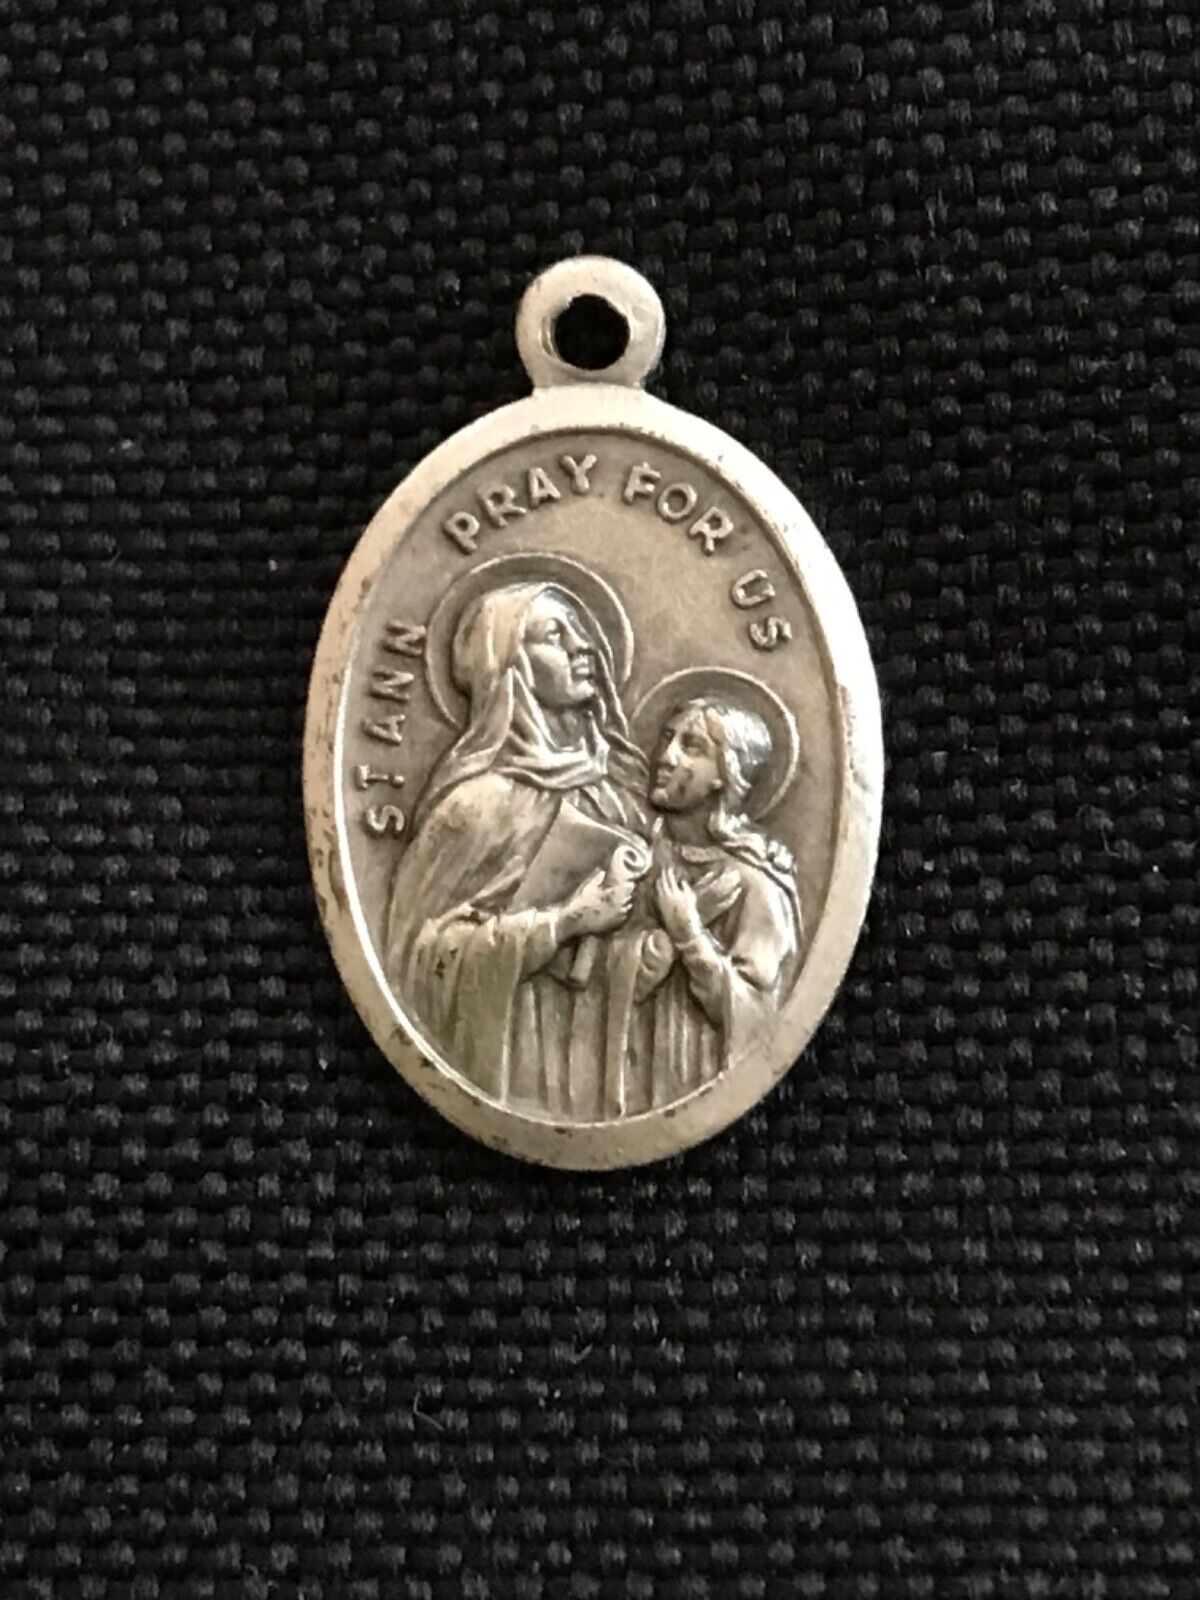 VINTAGE ST. ANN RELIGIOUS RELIC, OVAL MEDAL, GUARDIAN ANGEL on BACK, SPIRITUAL